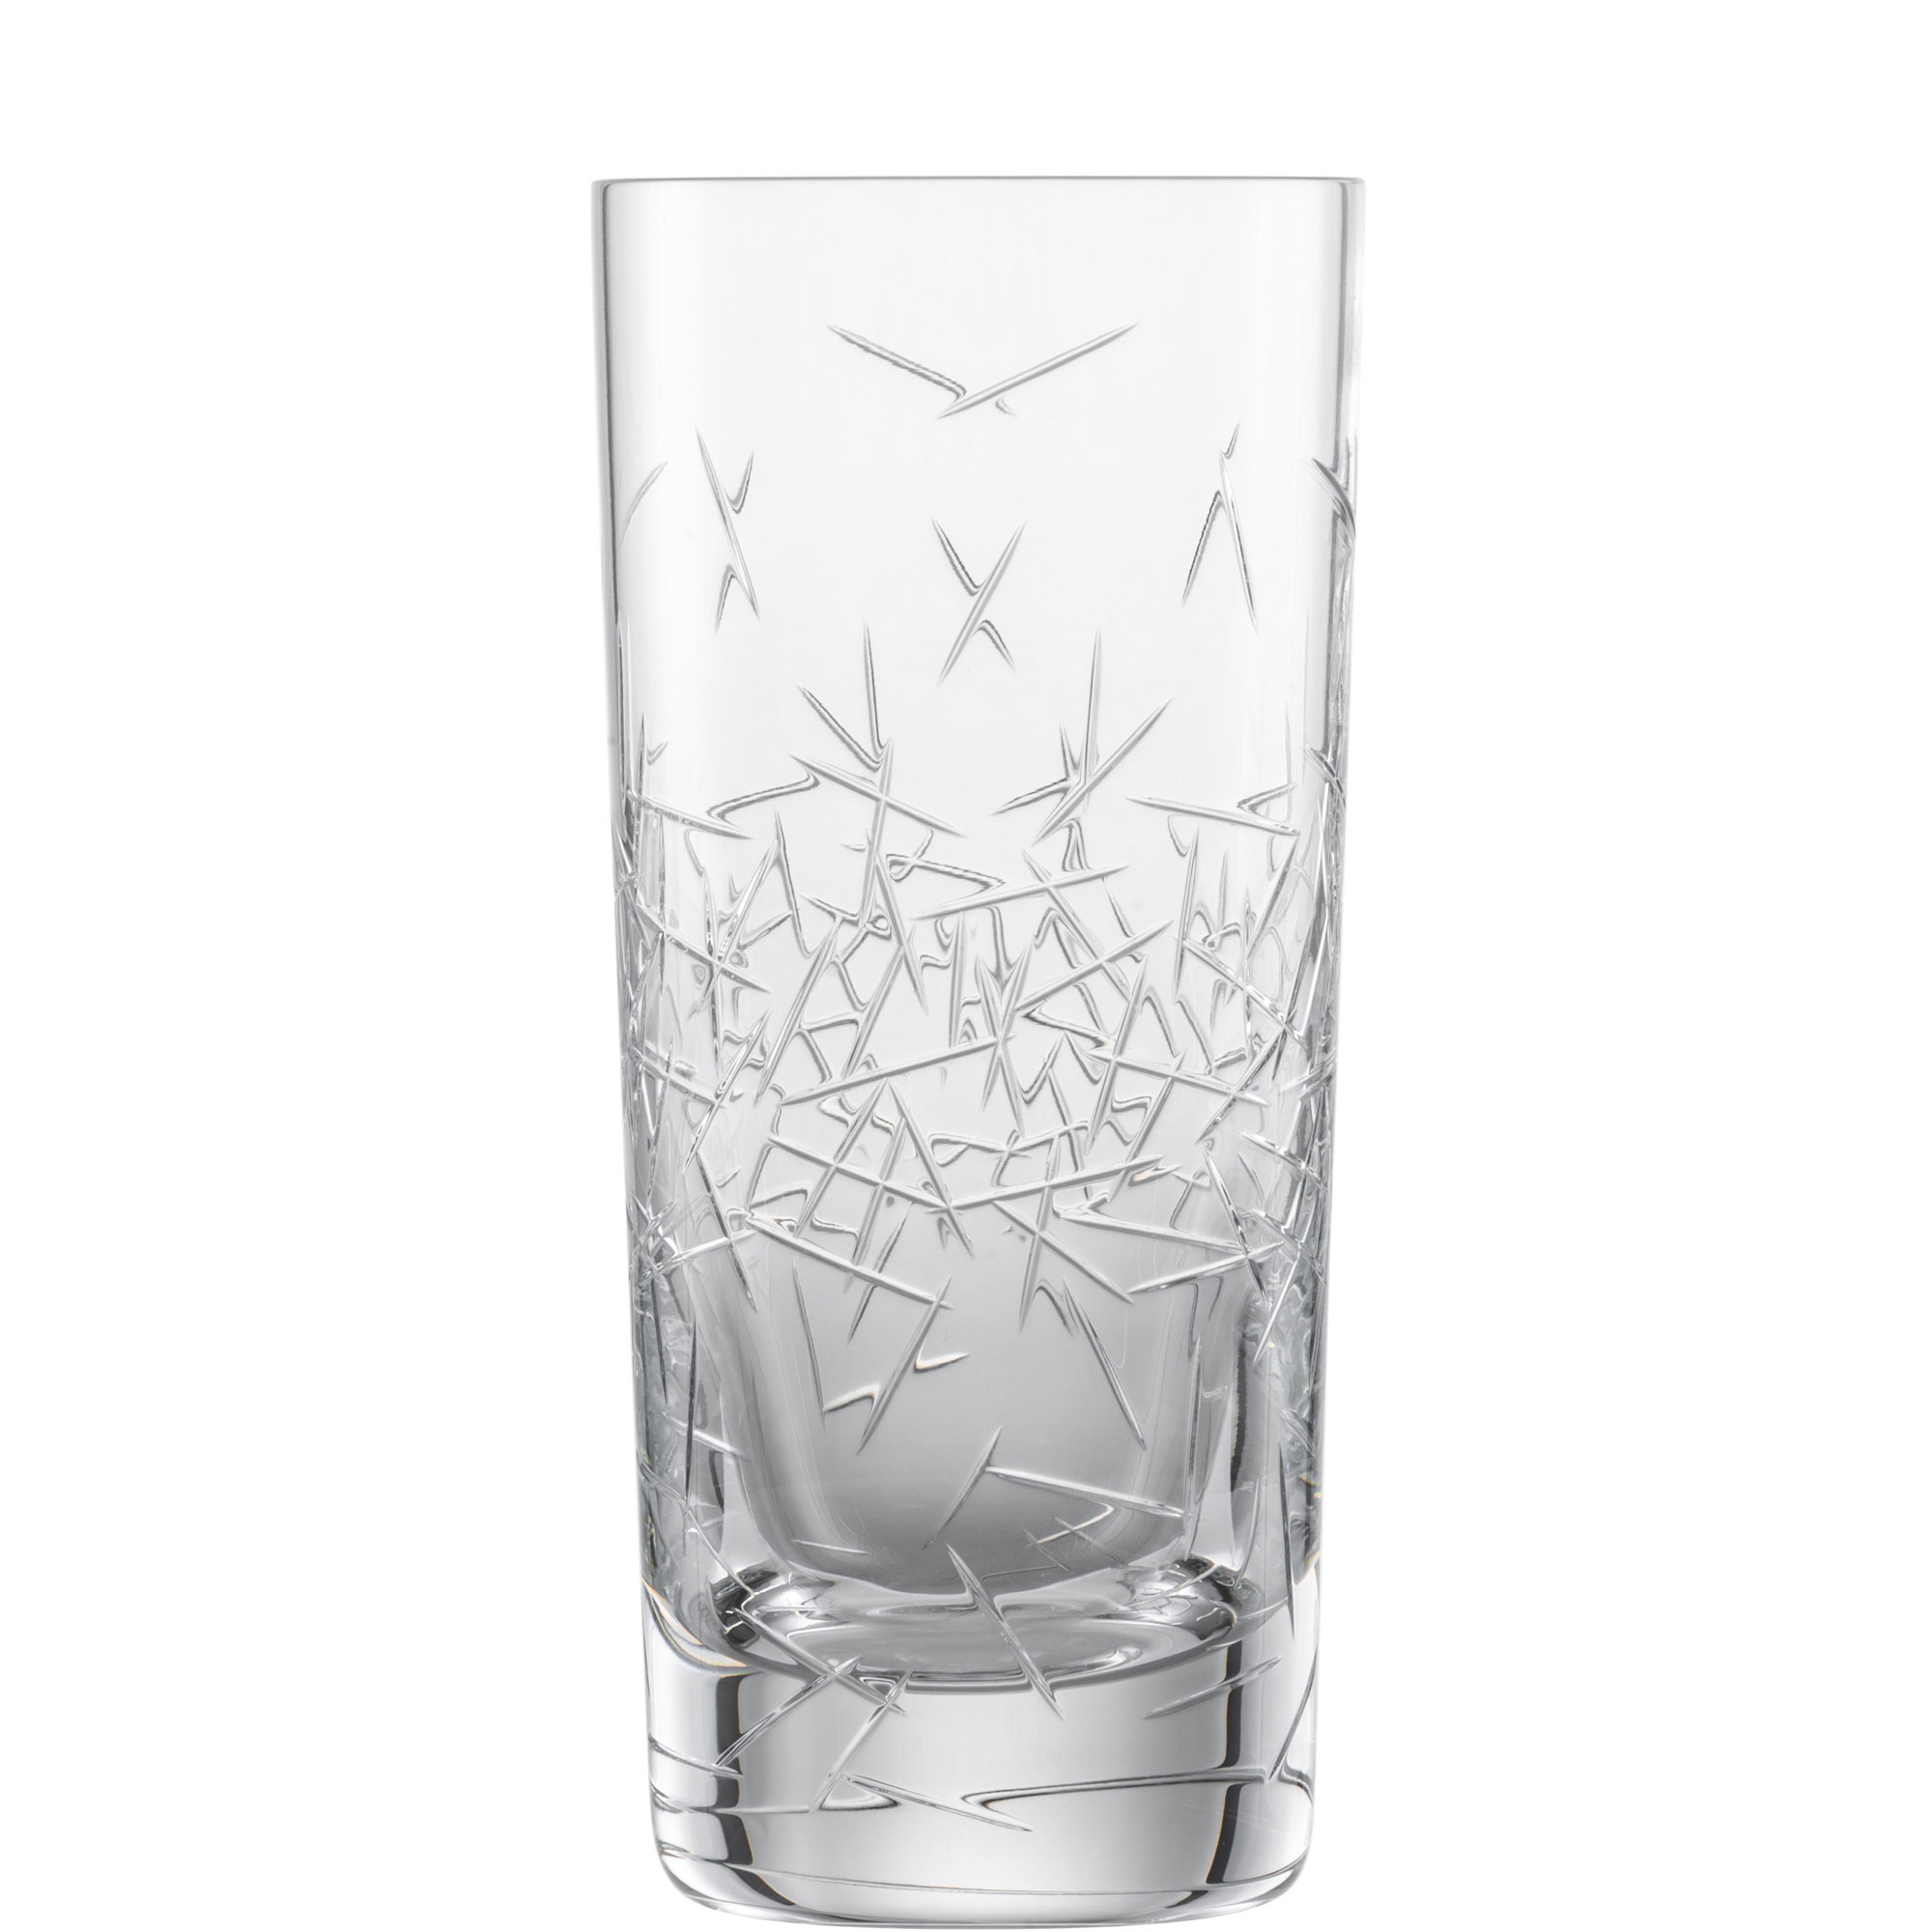 Long drink glass Hommage Glace, Zwiesel Glas - 474ml (1 pc.)